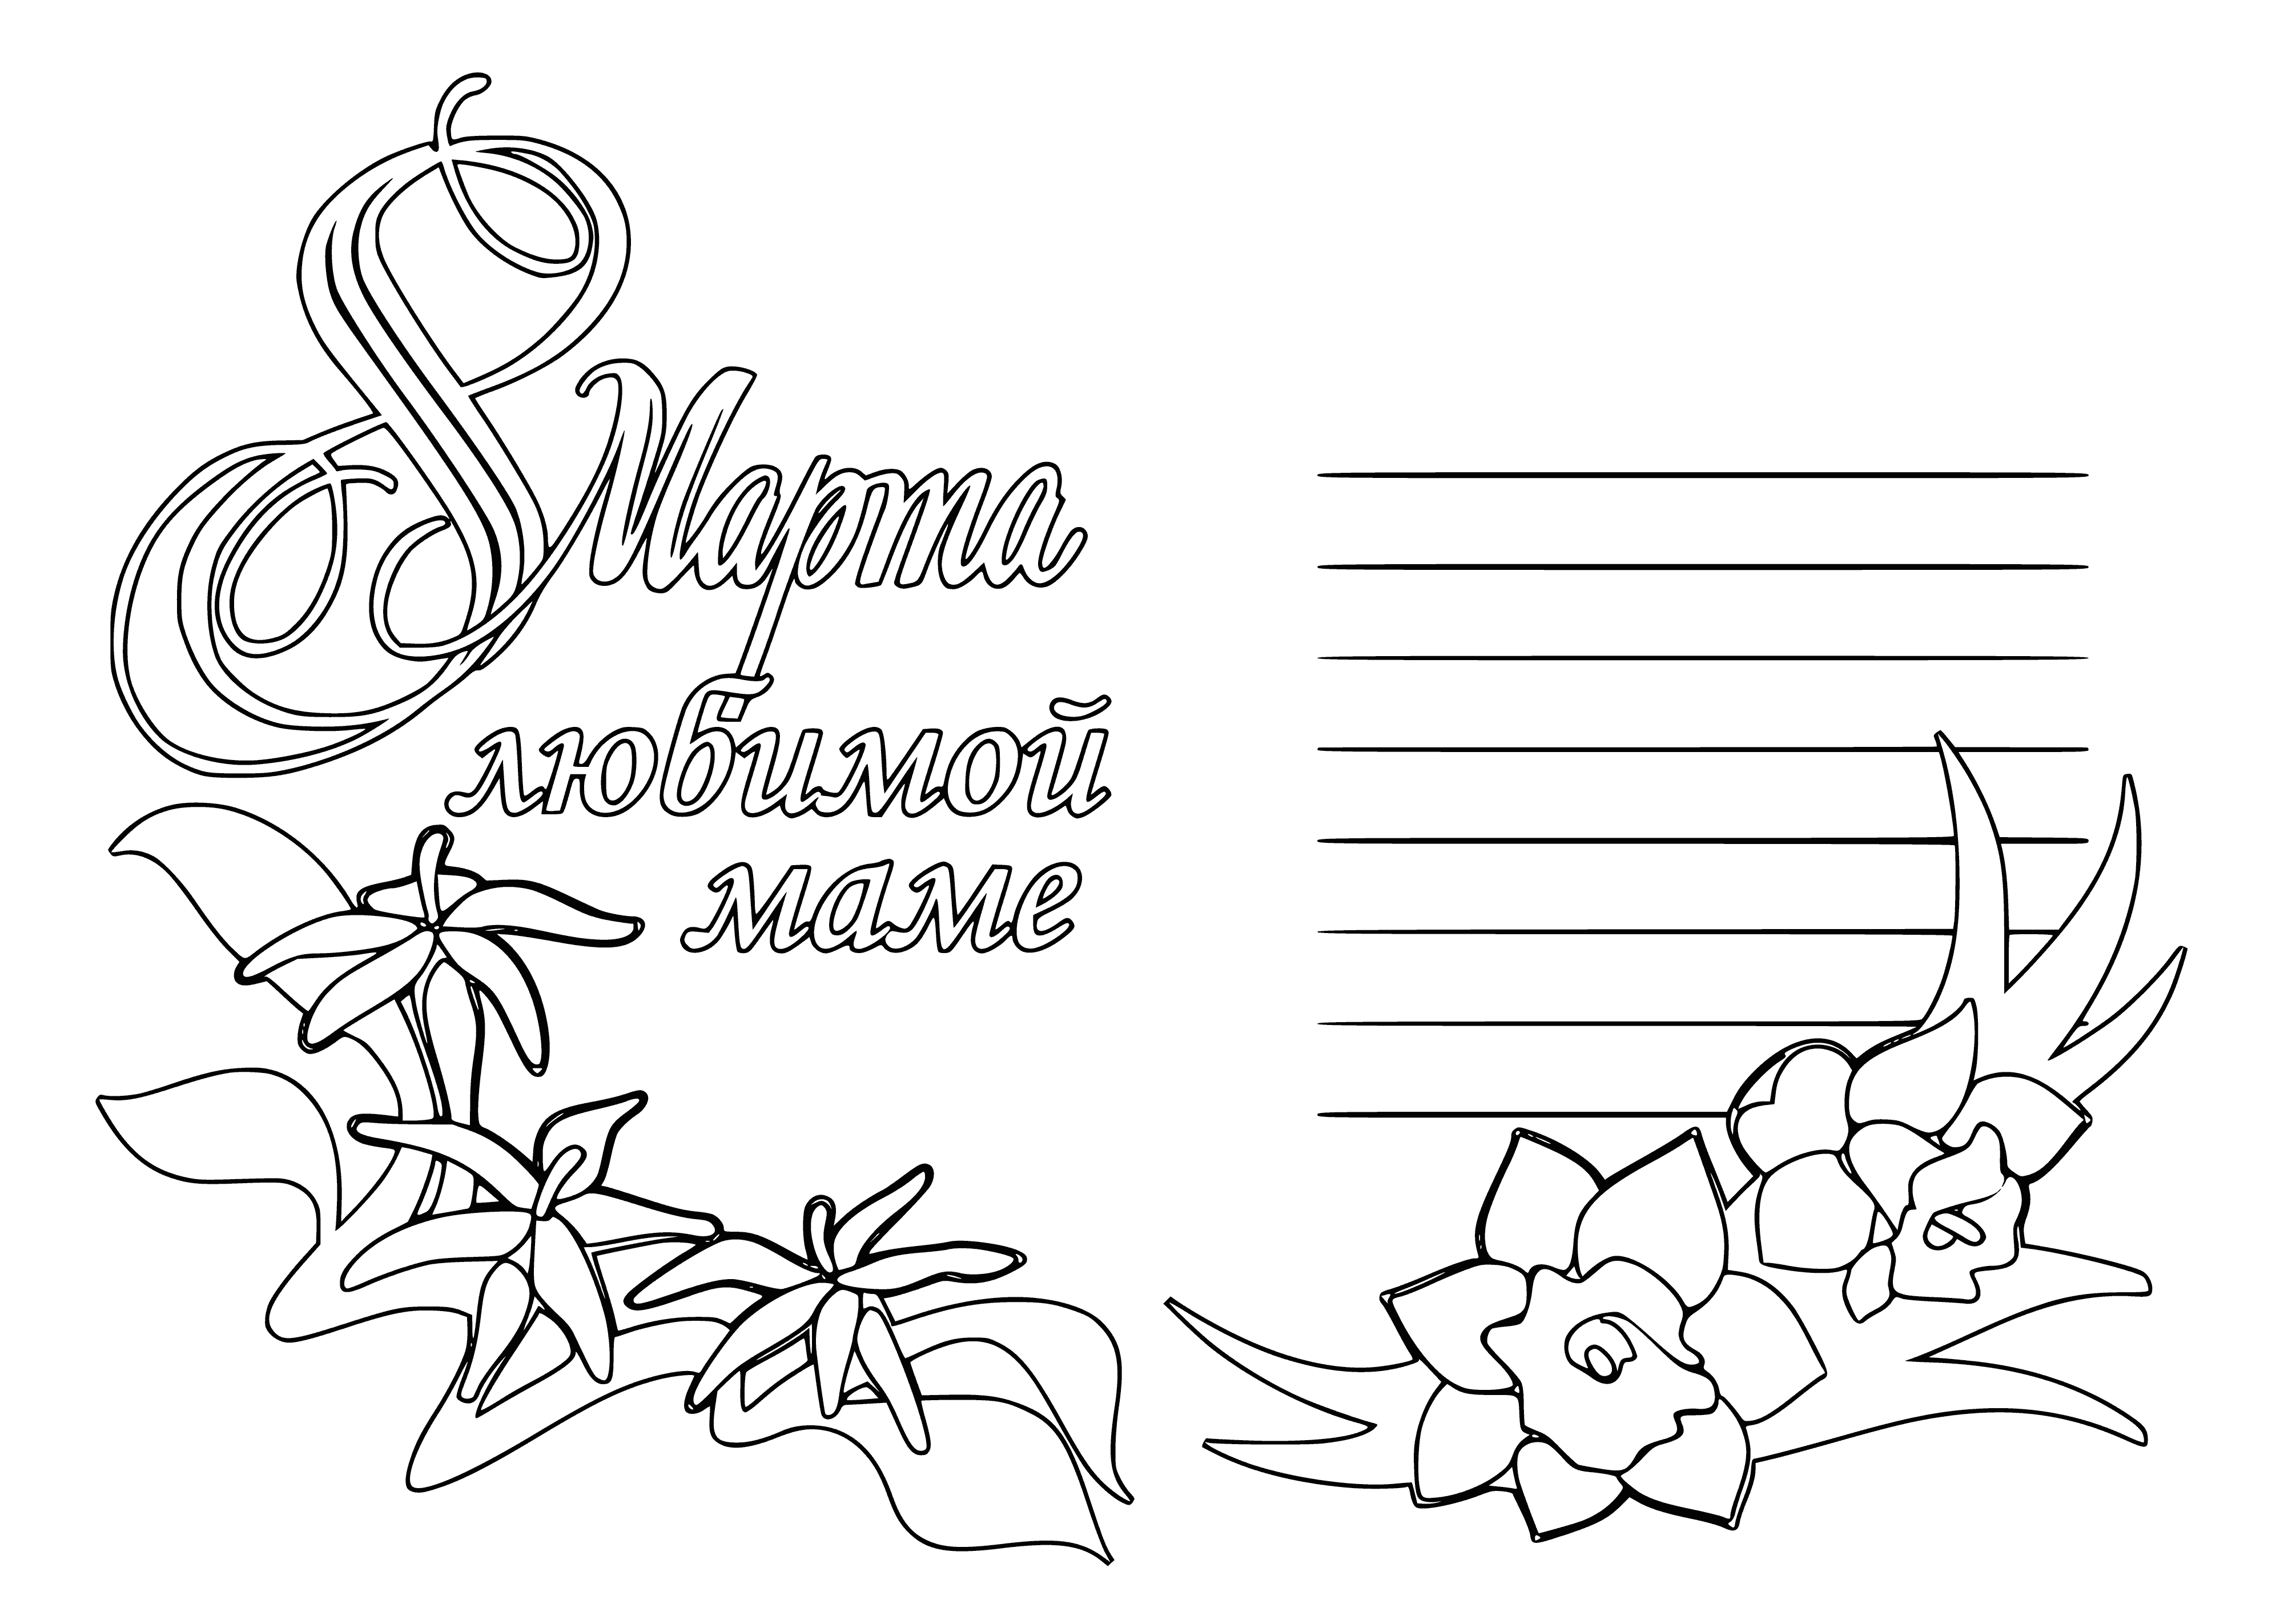 coloring page: Group of diverse women unite to celebrate International Women's Day (8th March), showing their strength & unity with their arms raised against a gradient background.